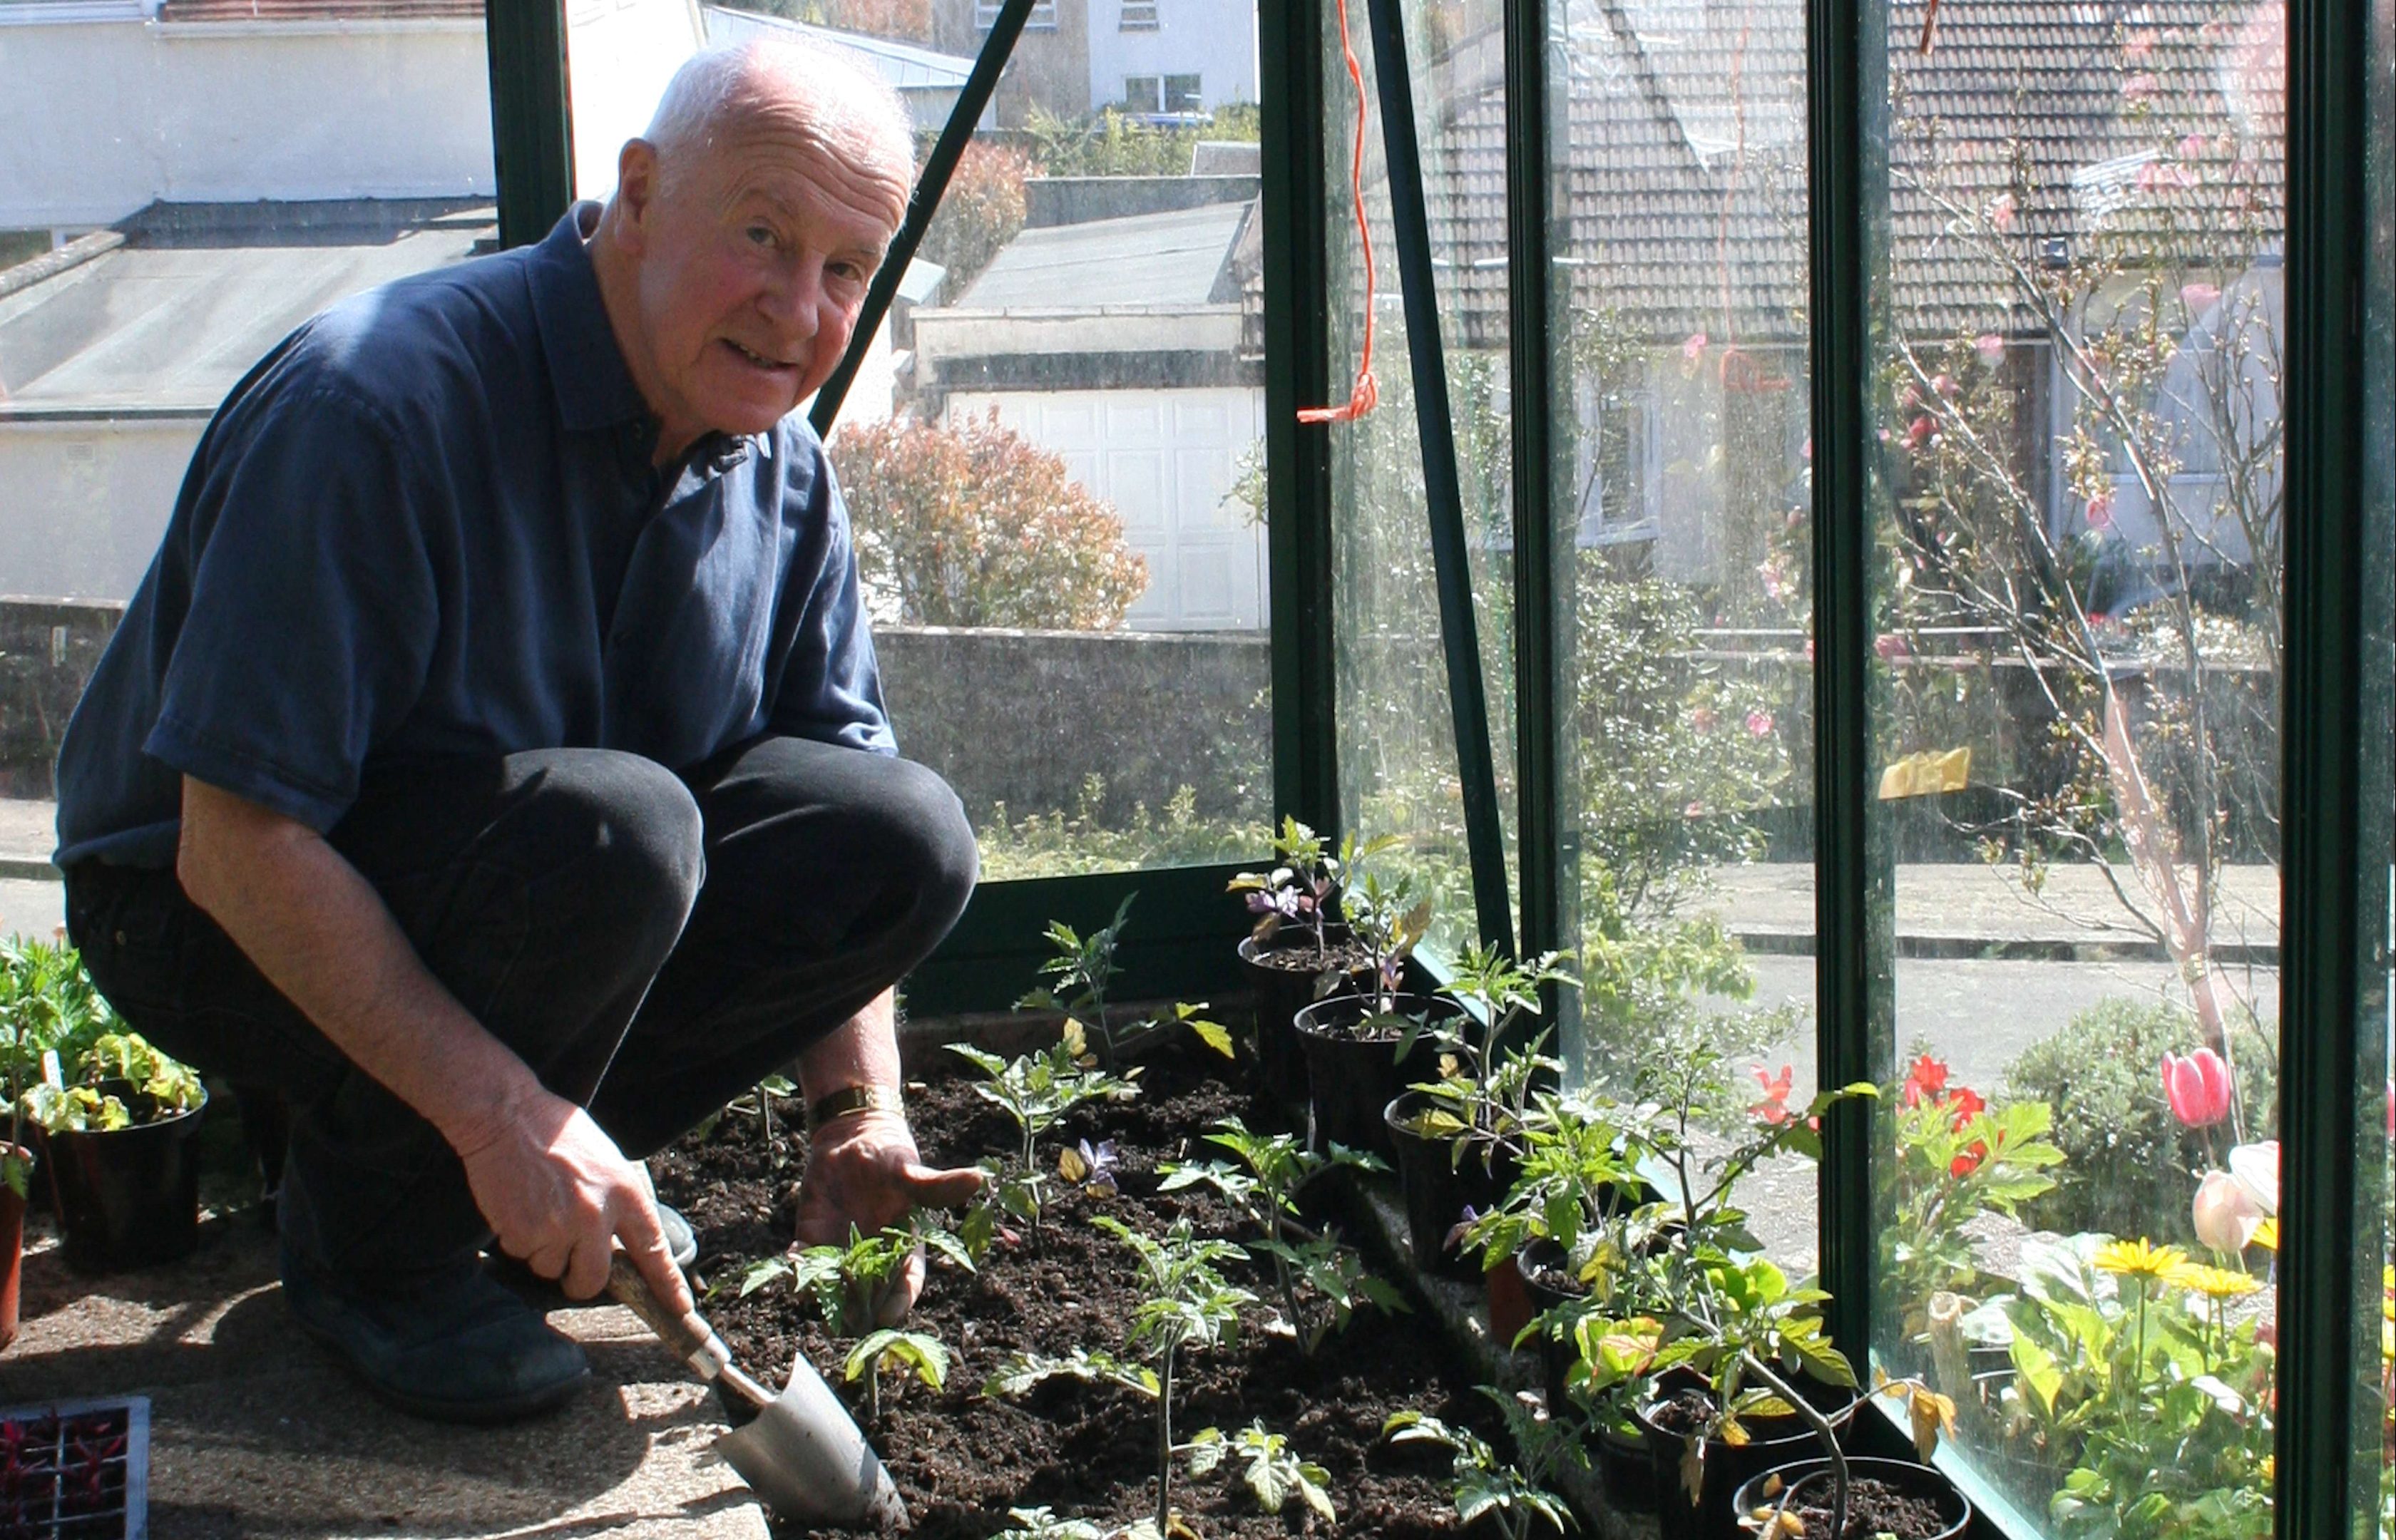 John planting tomatoes in the greenhouse.